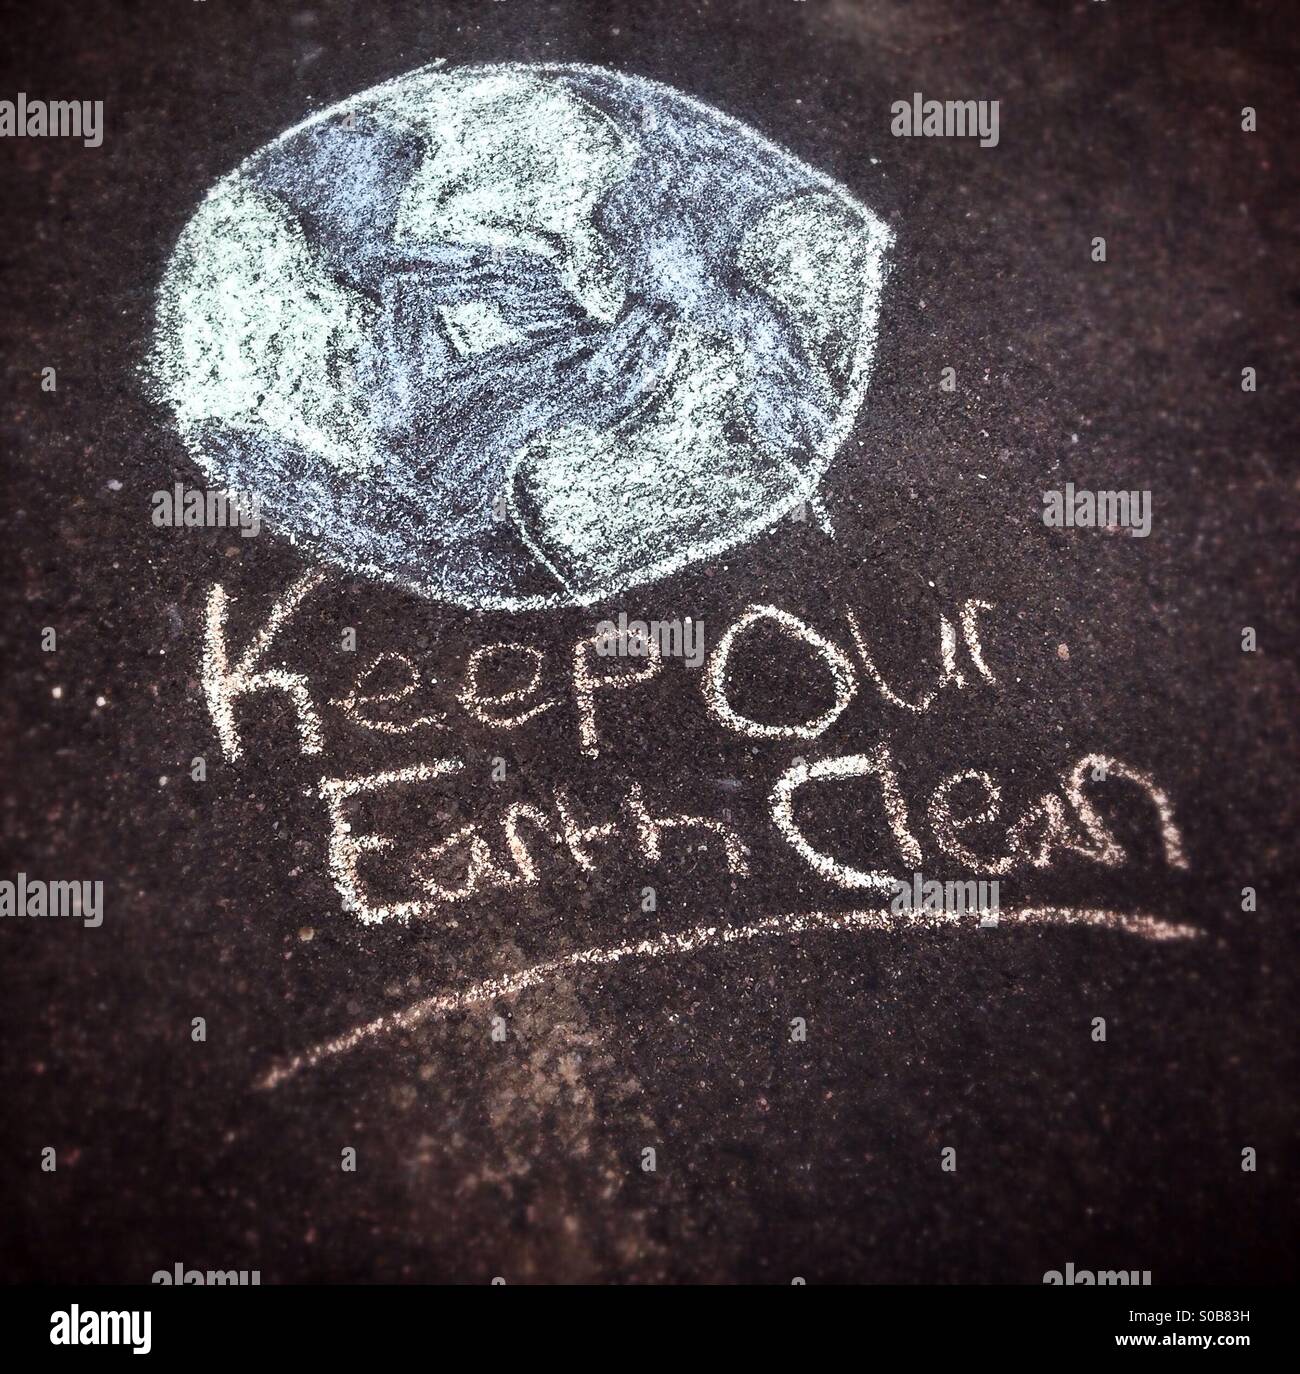 Keep our Earth clean. A message from Emma, my ten year old daughter. A child's chalk drawing on asphalt. Stock Photo